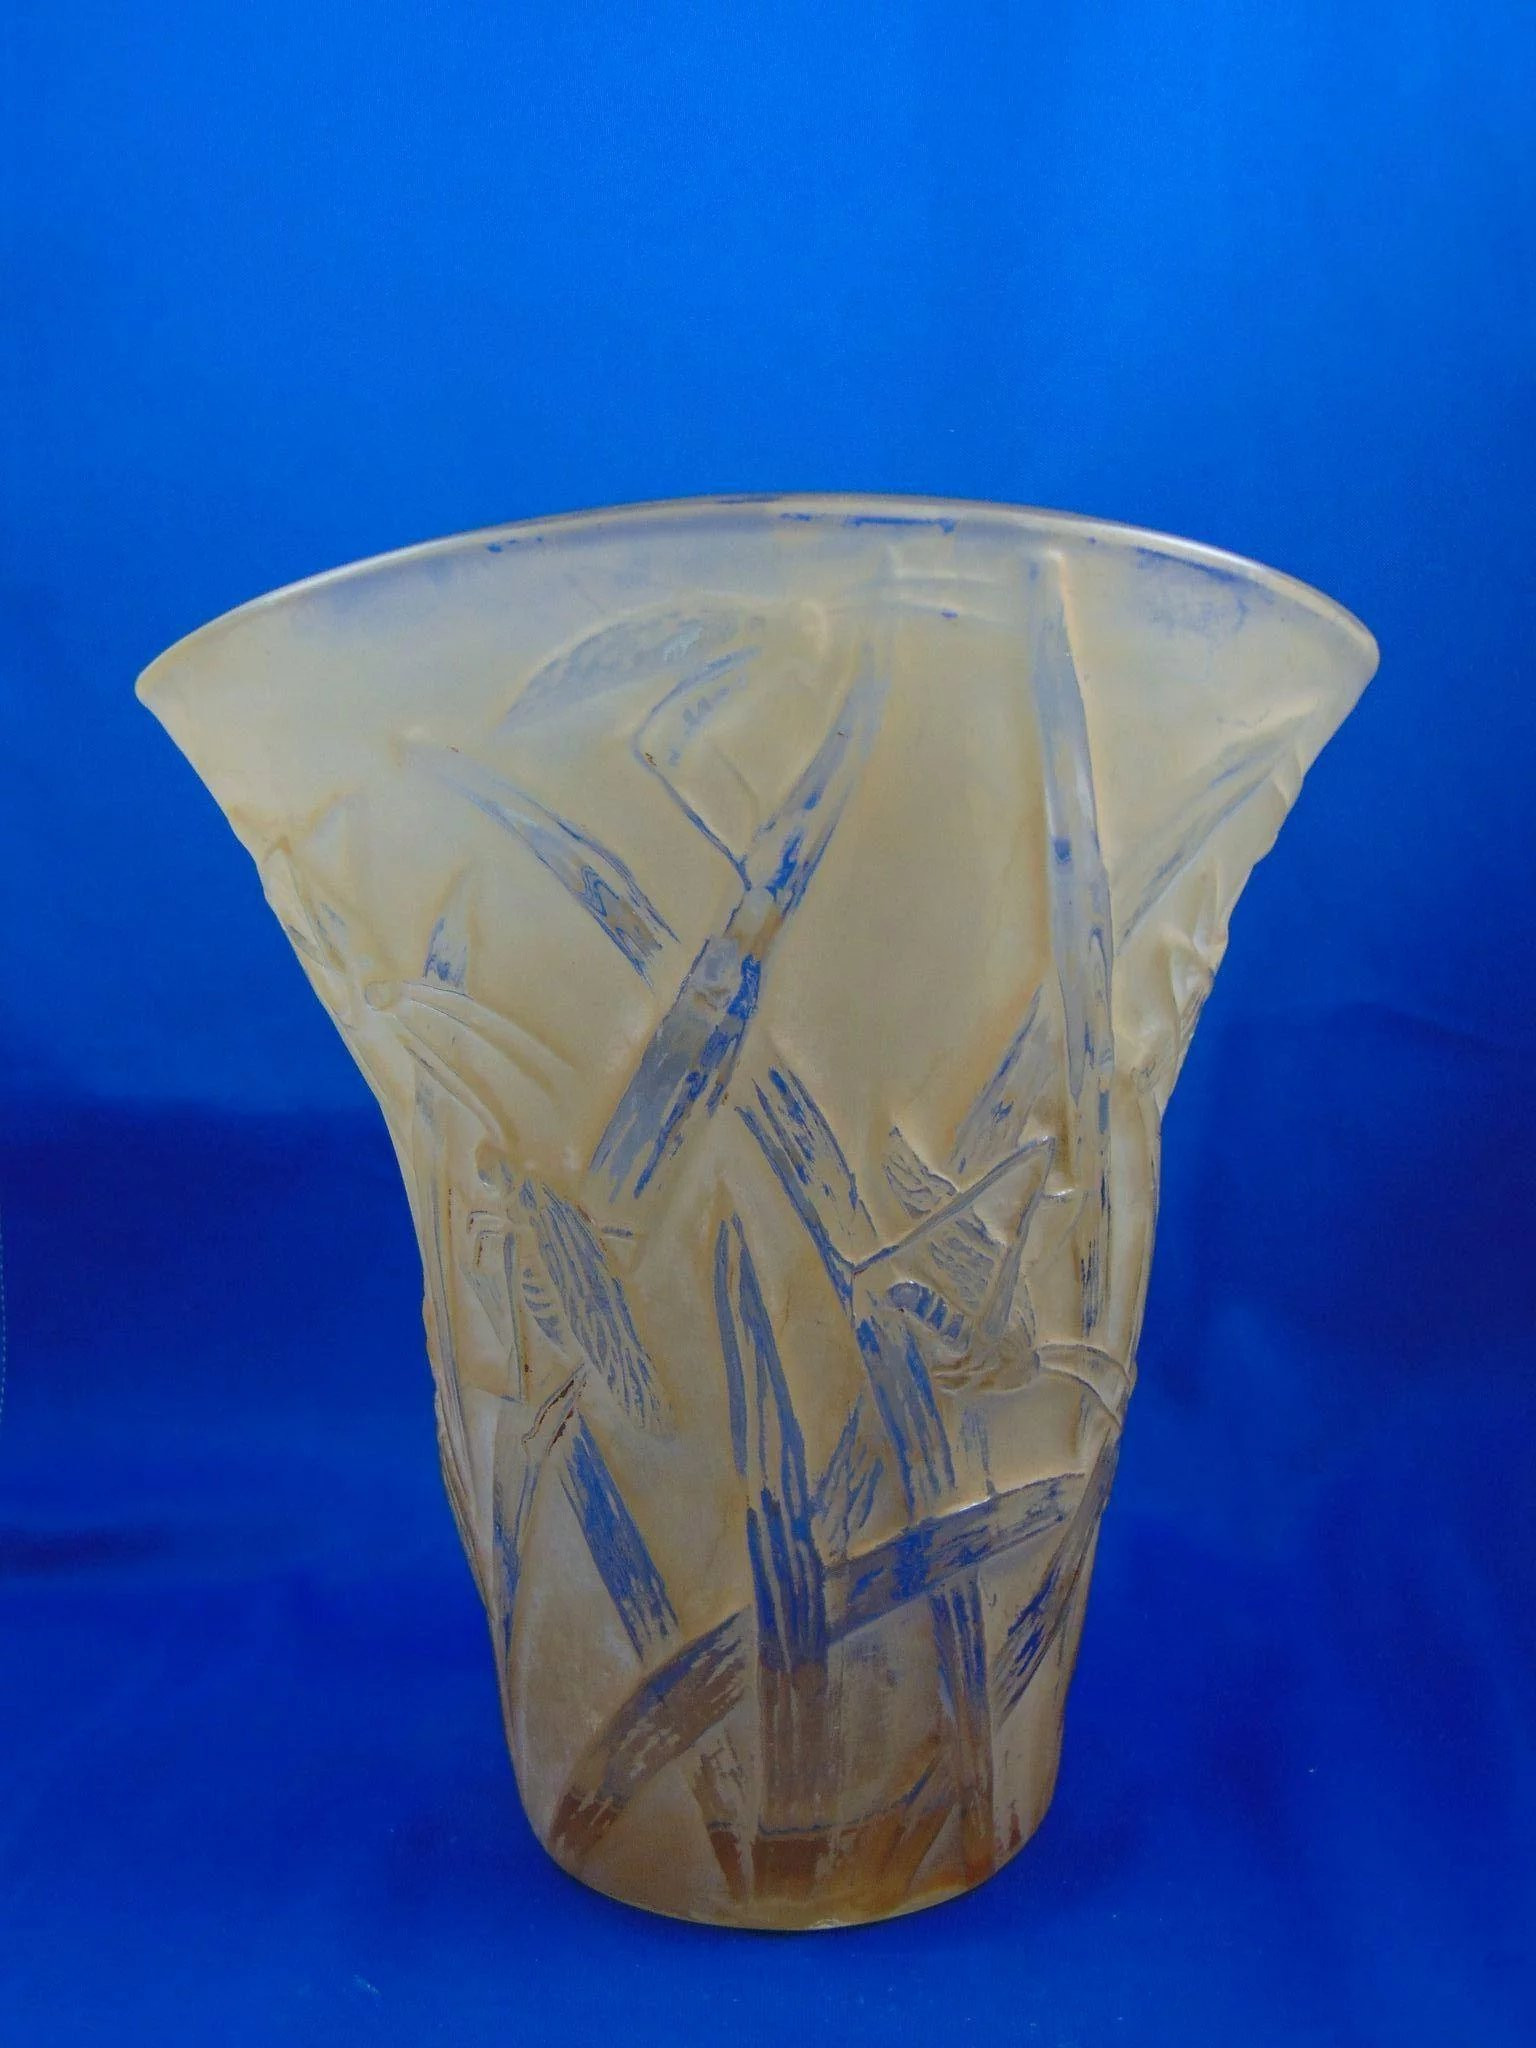 consolidated glass vase of consolidated glass yellow wash martele katydid vase c 1920s throughout click to expand